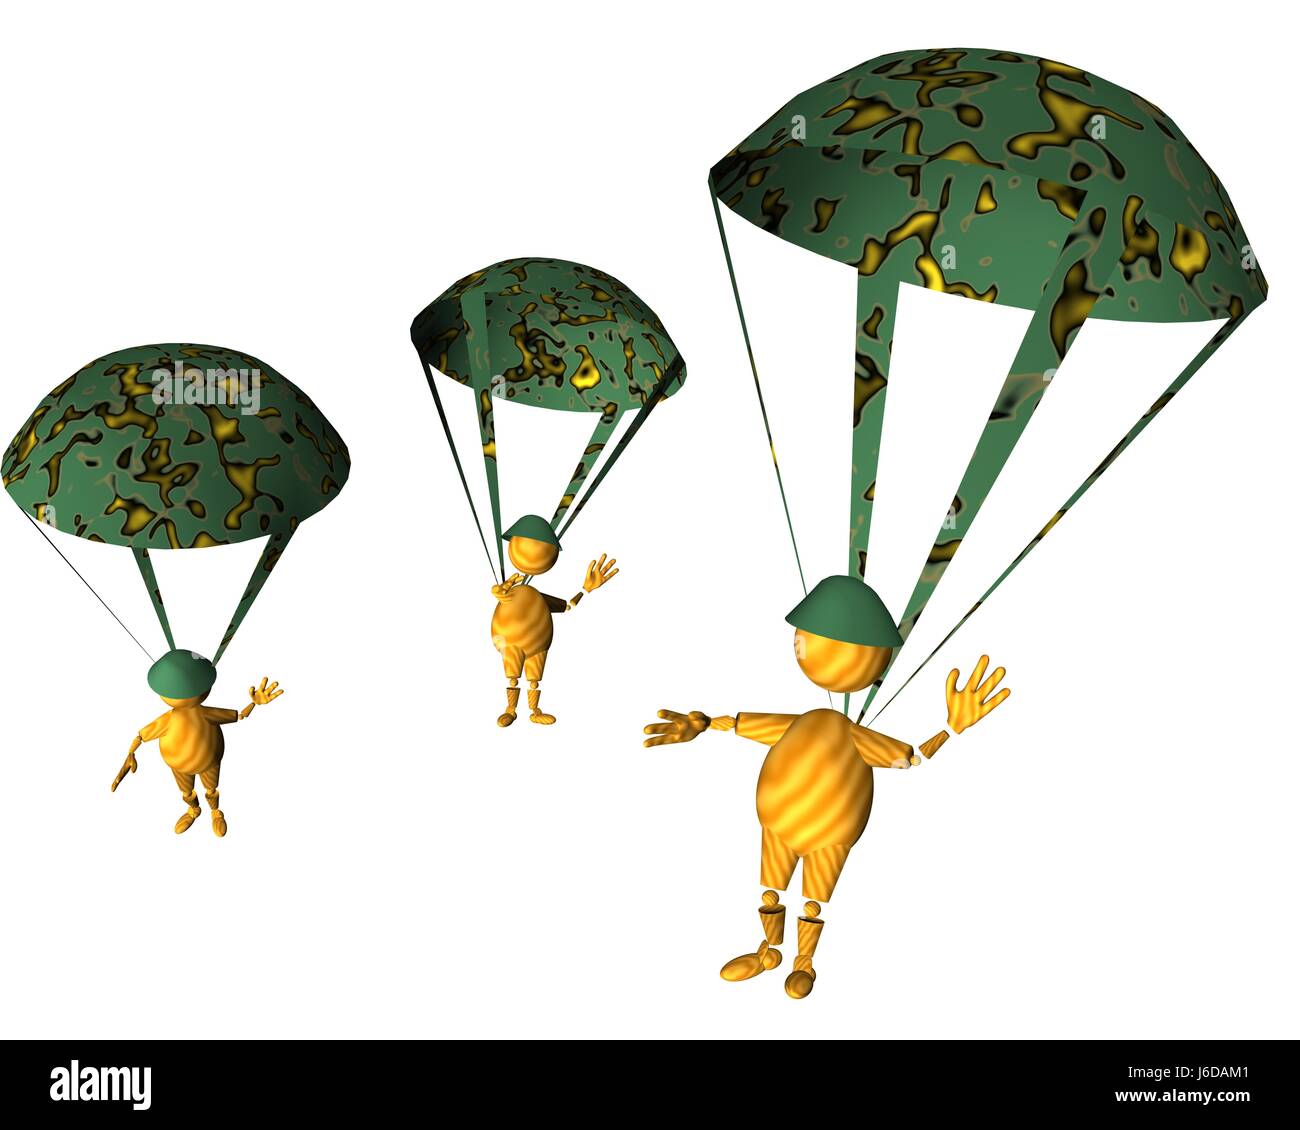 Army Force Parachute Military Parachutes Strength Men Man Art Isolated